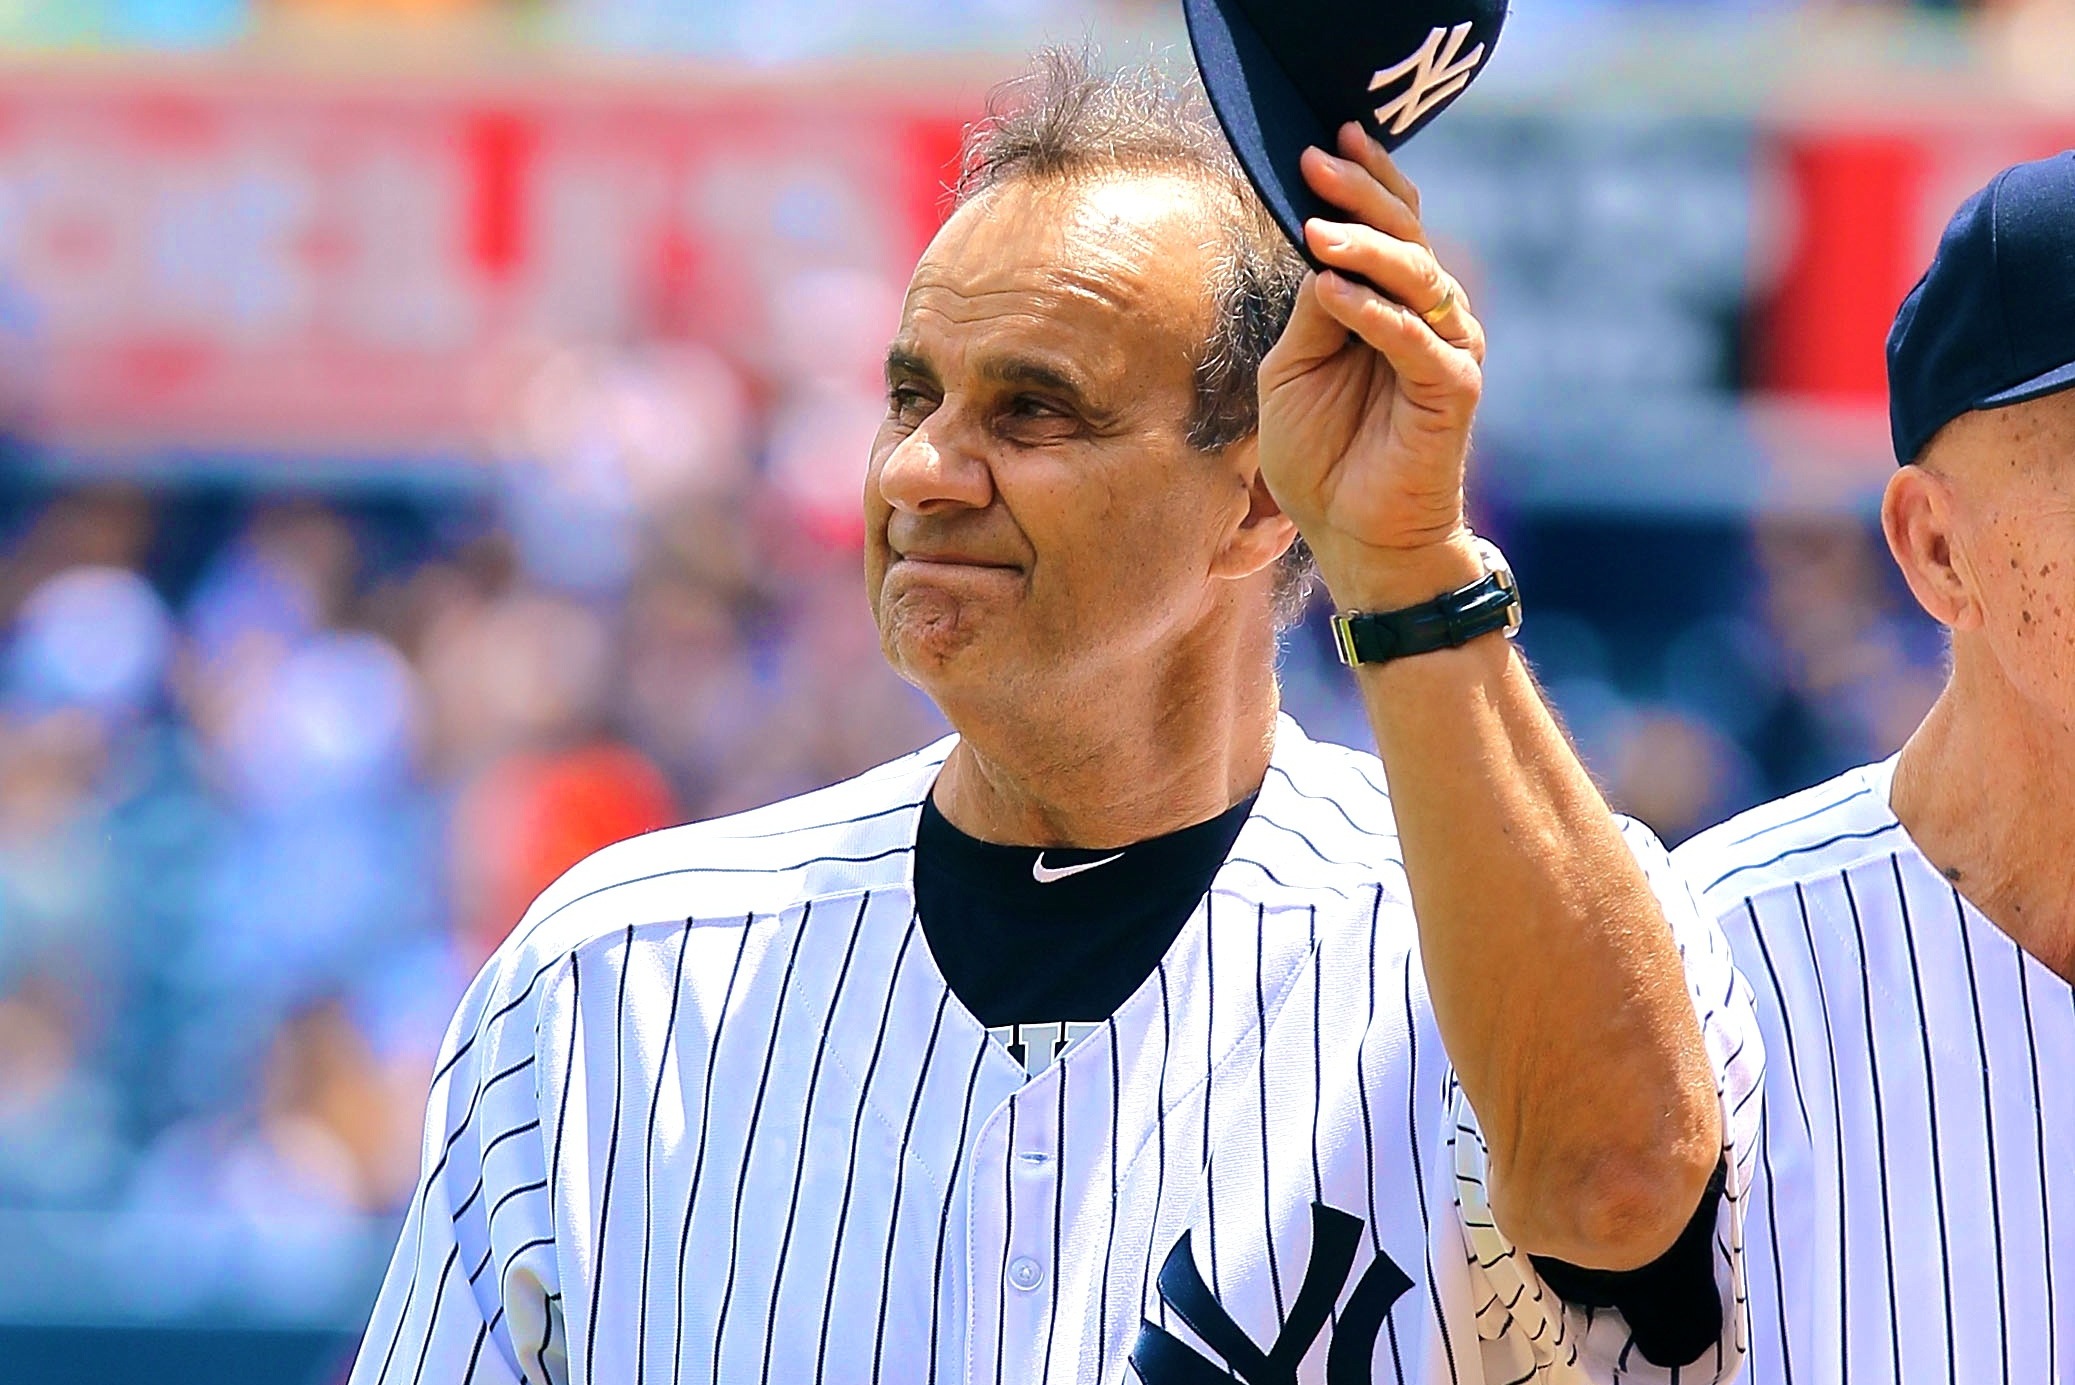 Joe Torre's No. 6 Jersey Will Be Retired by New York Yankees